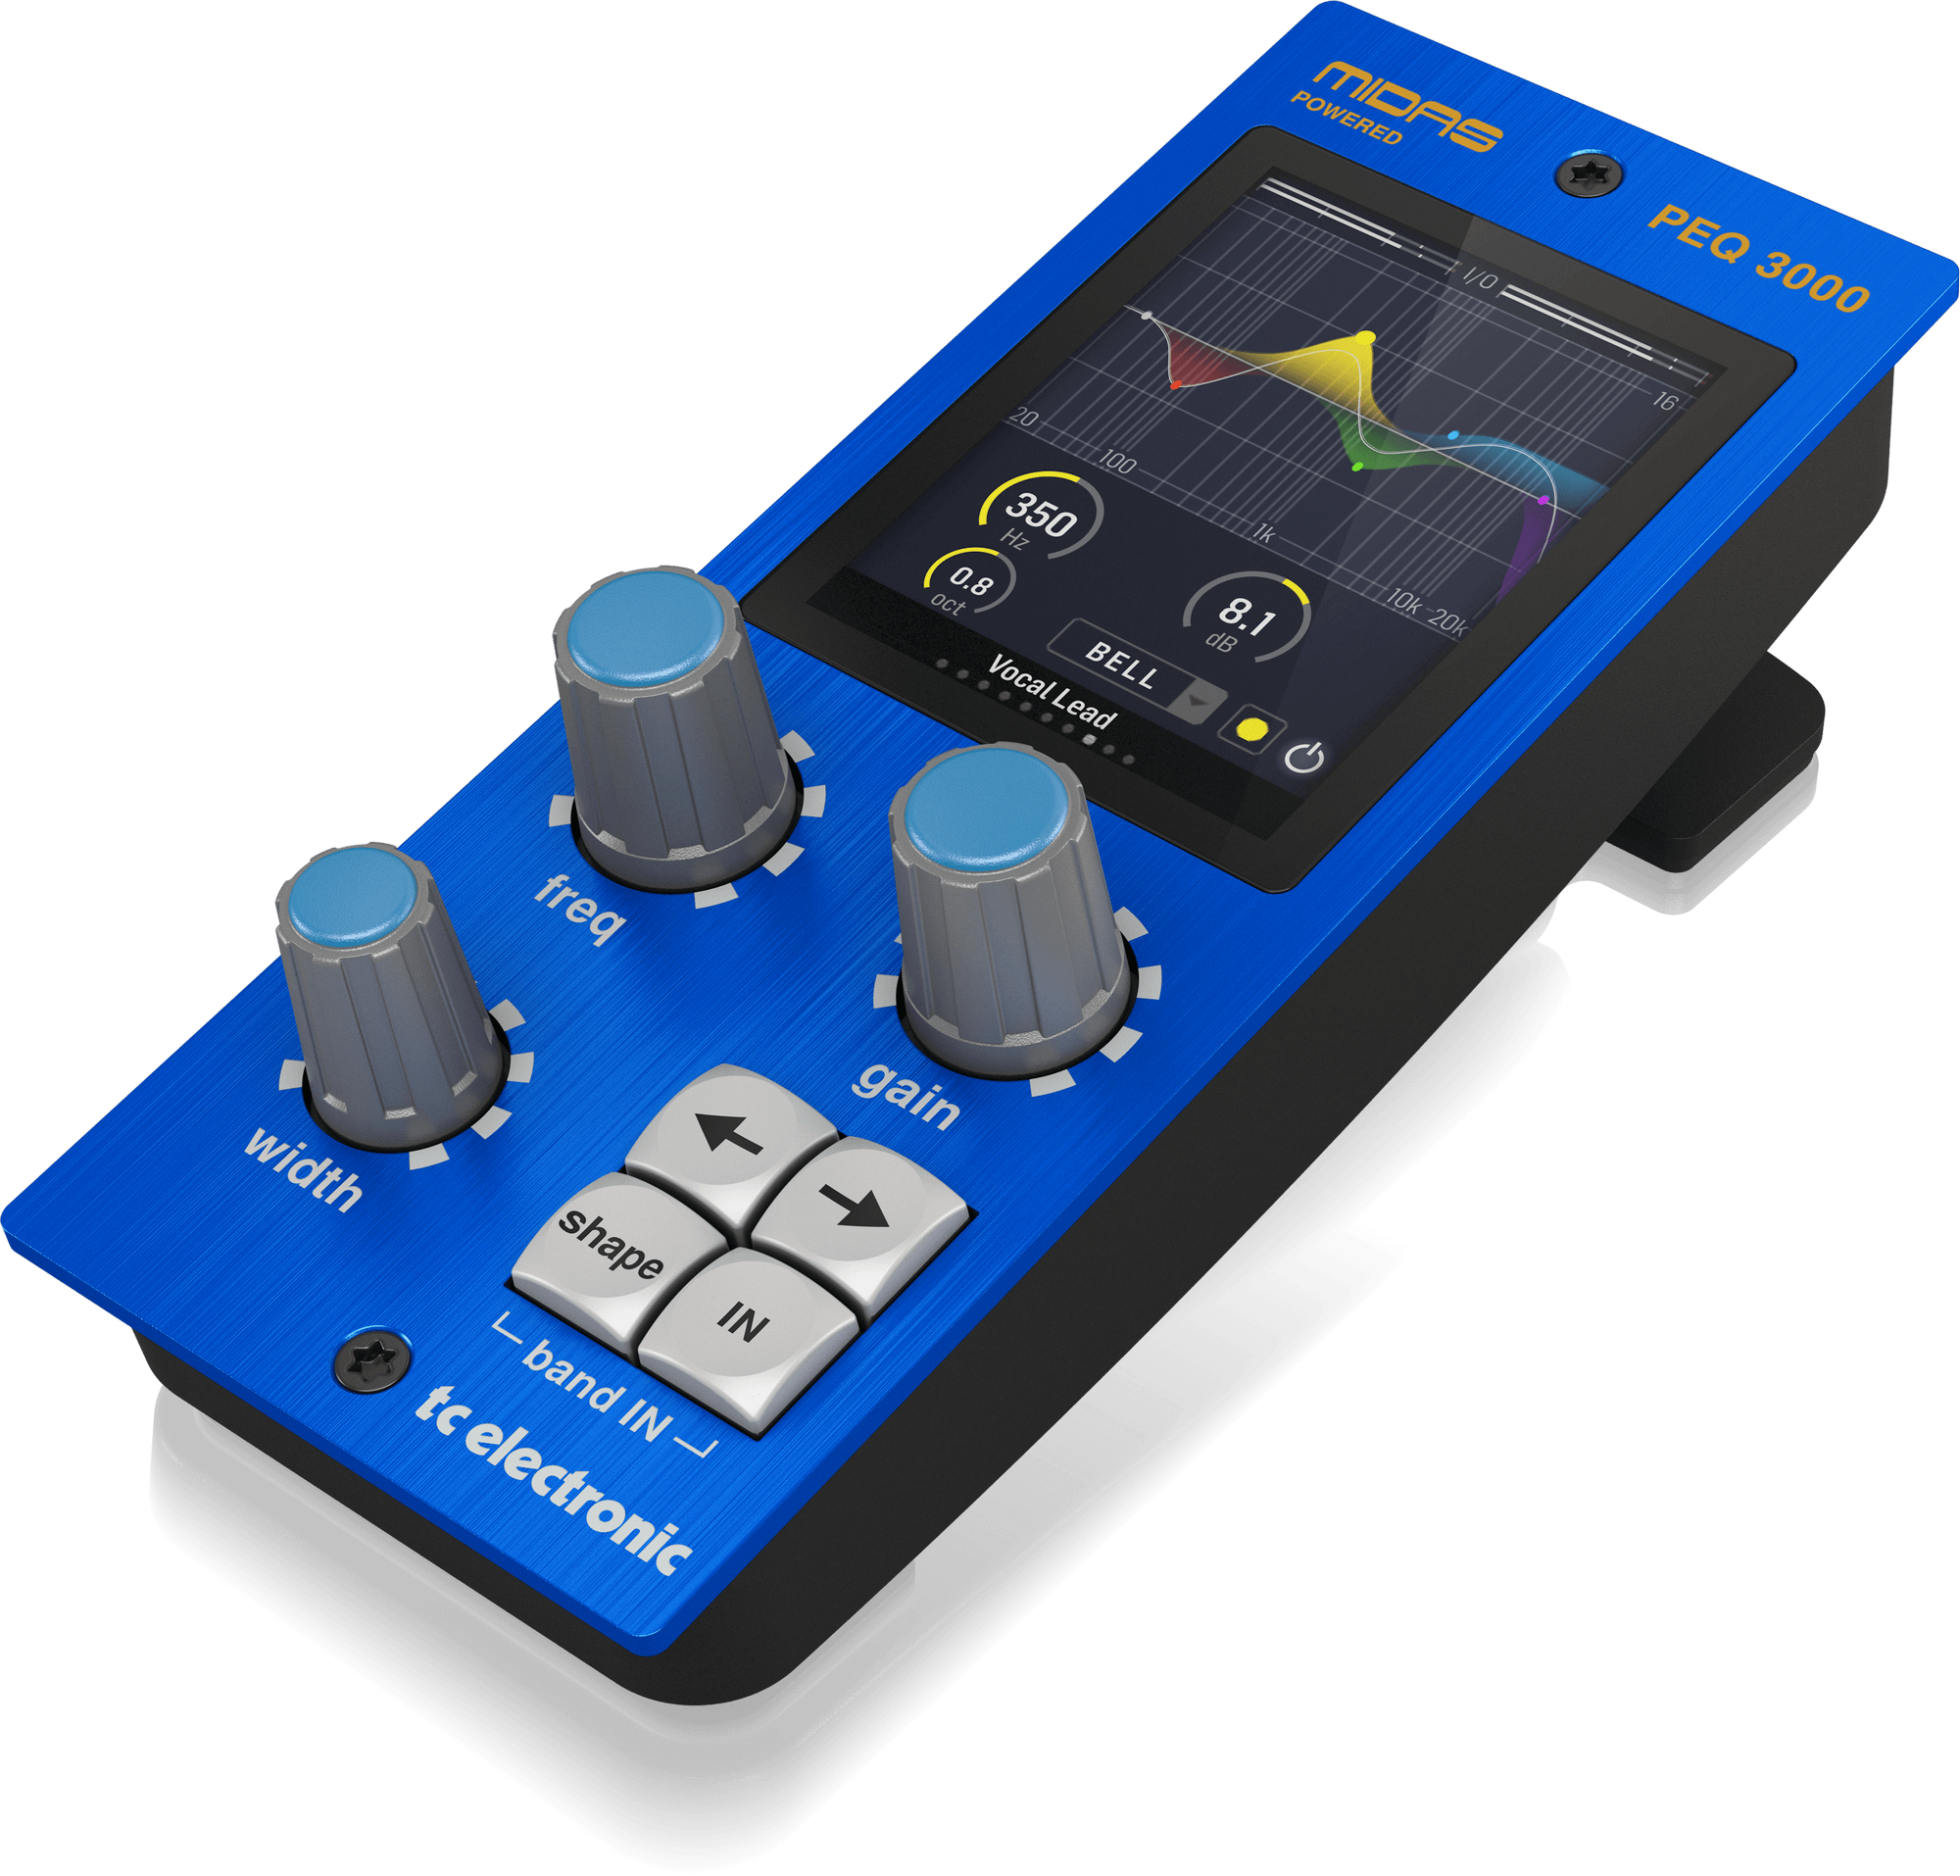 TC Electronic Midas-powered Parametric Channel Eq Plug-in With Optional Analog-feel Desktop Interface, TC ELECTRONIC, AUDIO PROCESSOR, tc-electronic-audio-processor-tc-peq-3000-dt, ZOSO MUSIC SDN BHD